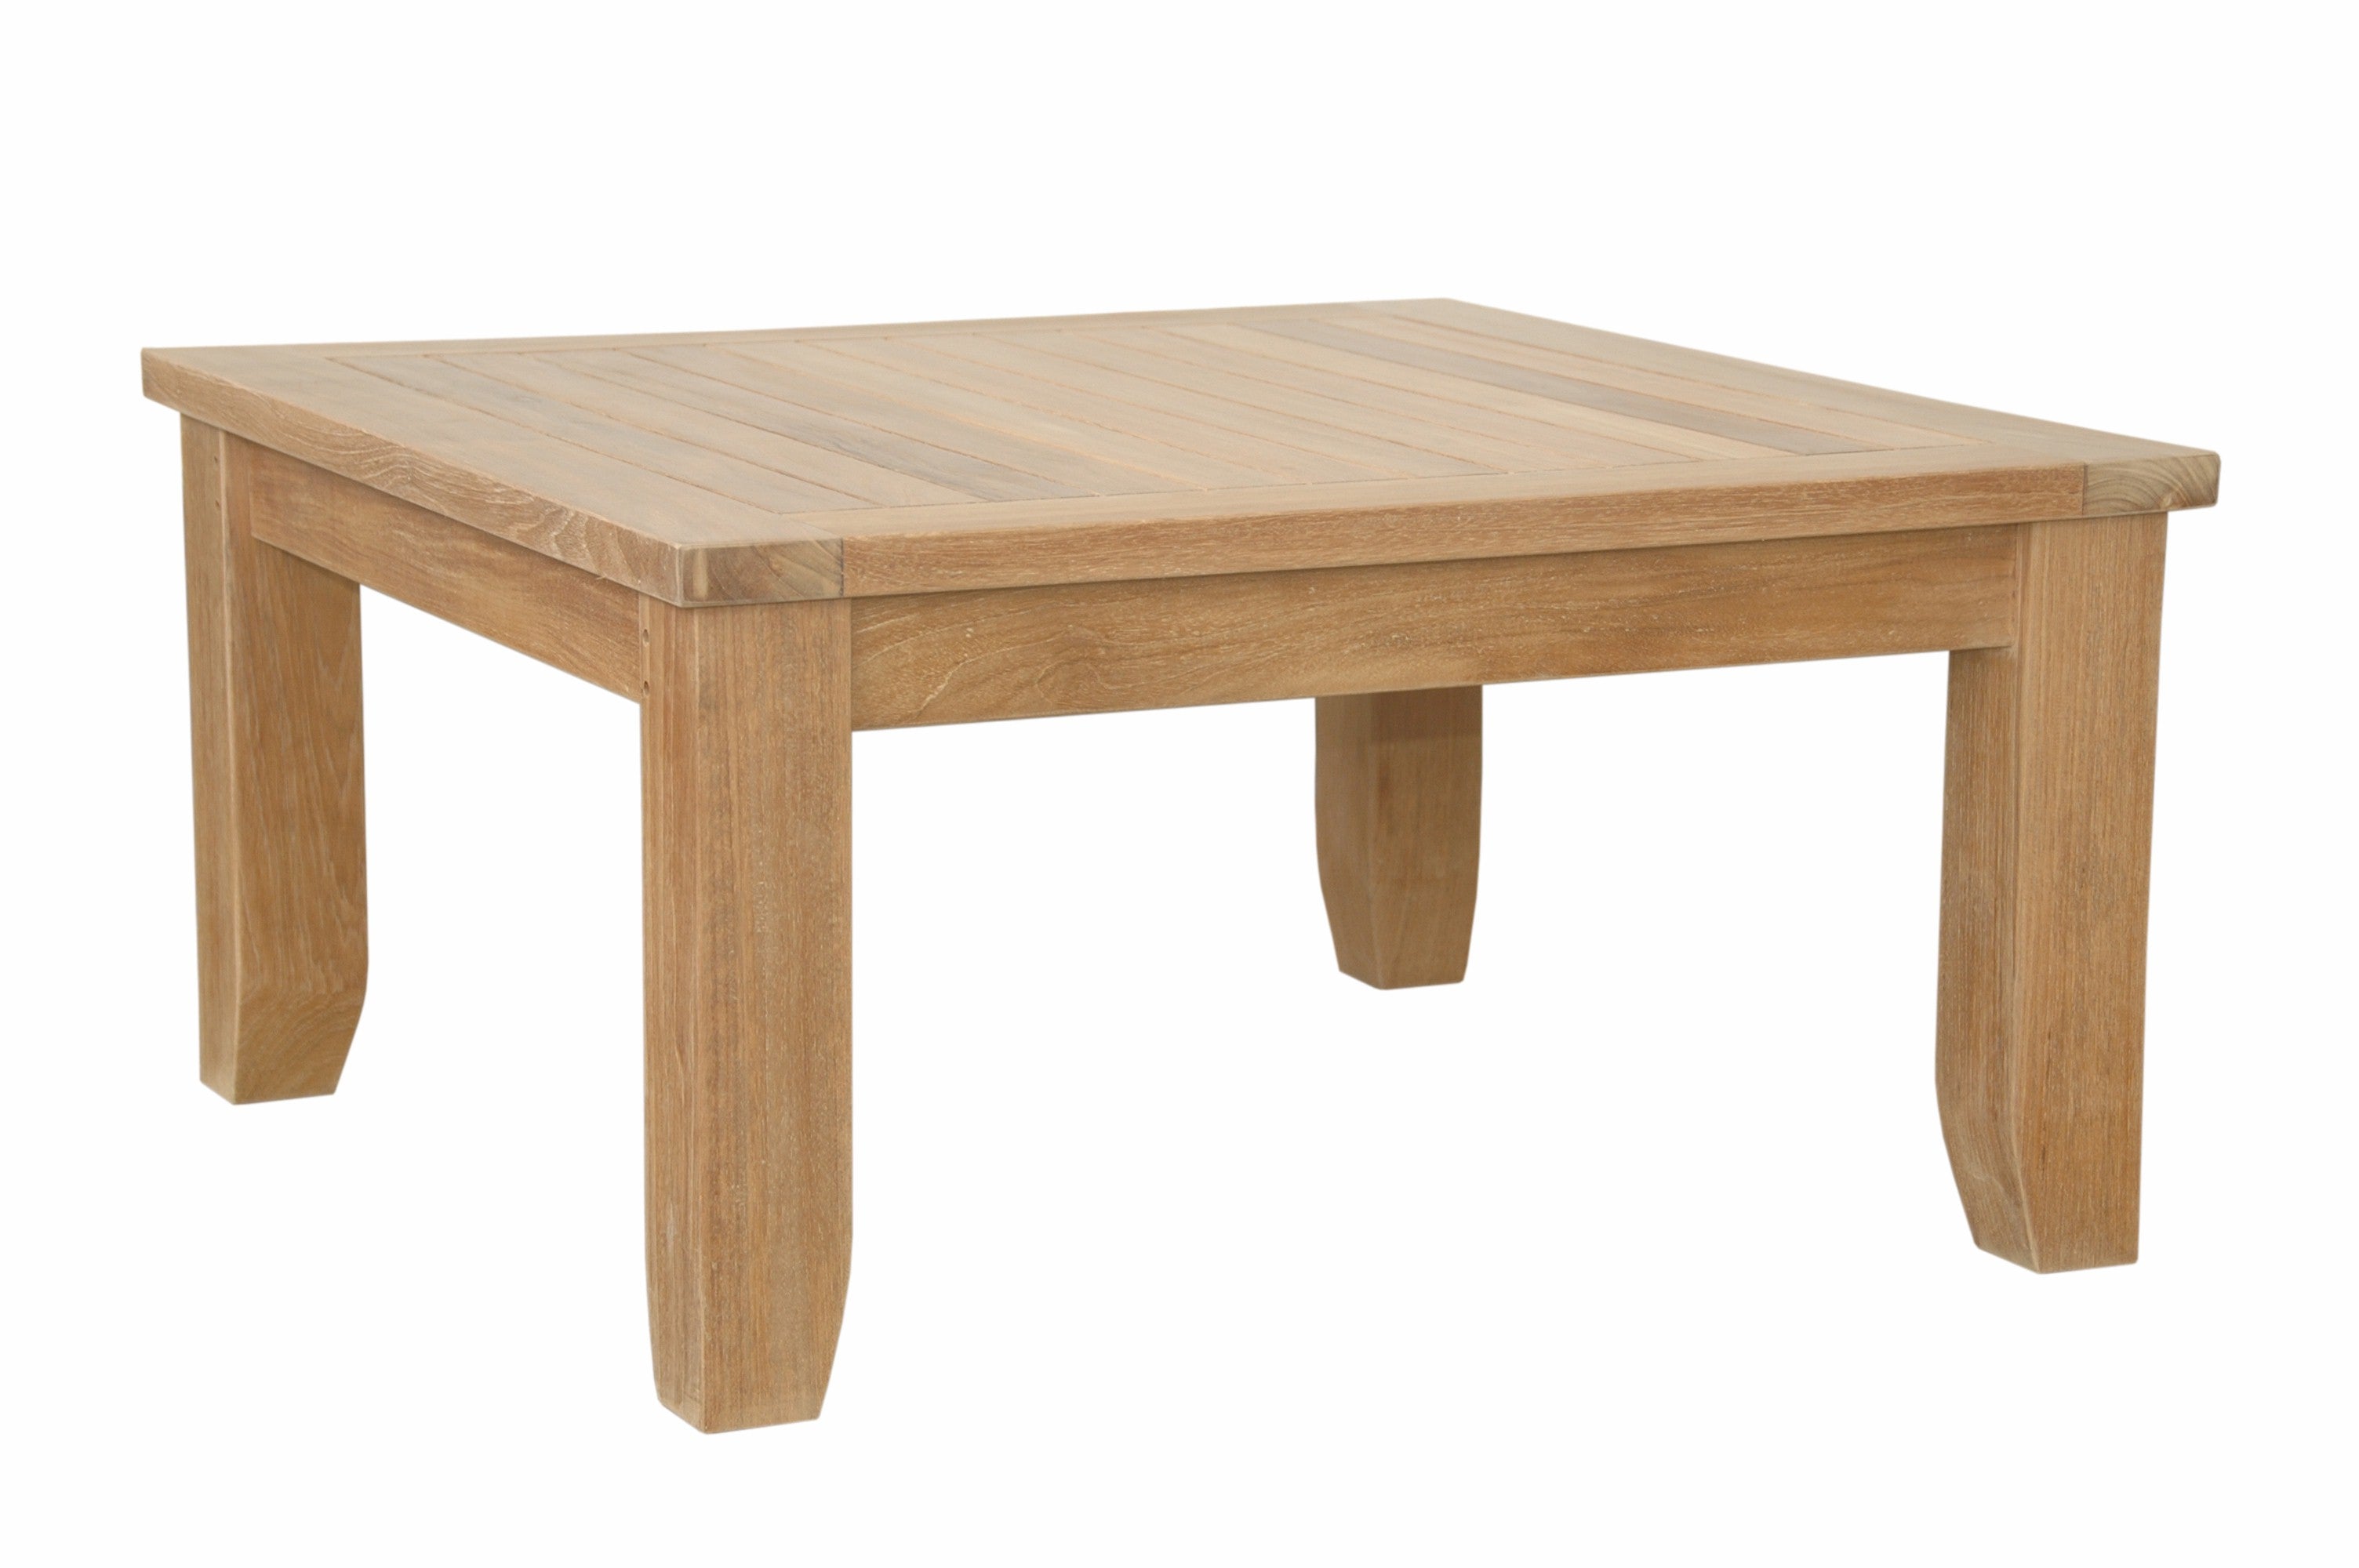 Anderson Teak Luxe Square Coffee Table